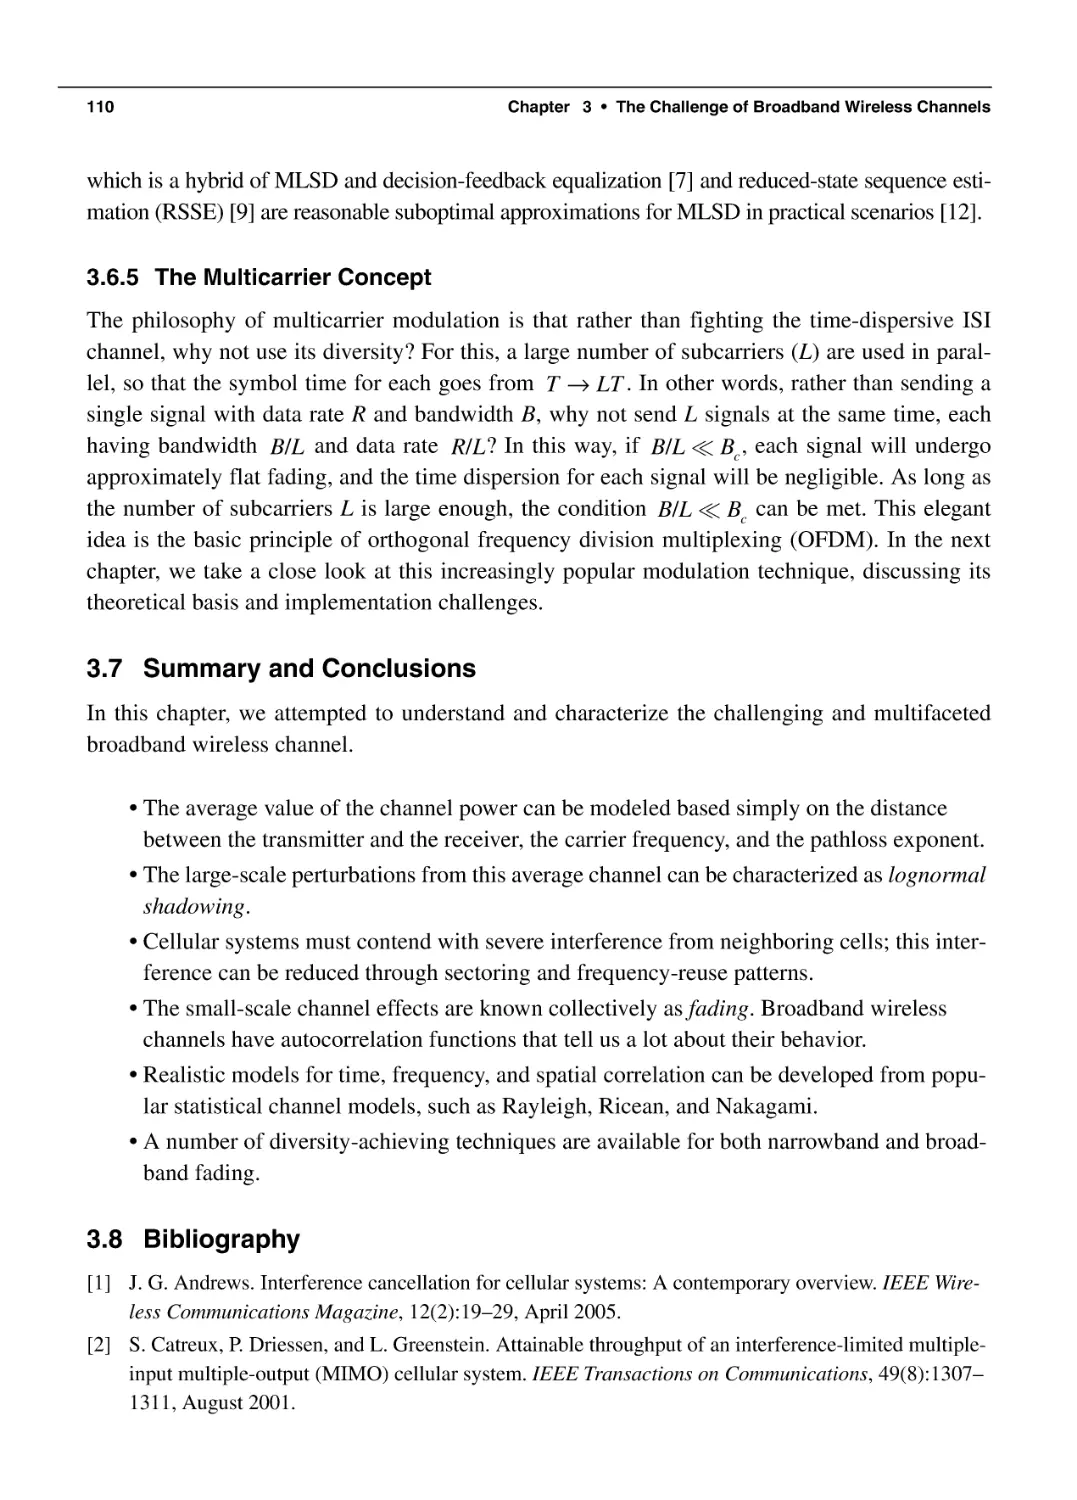 3.7 Summary and Conclusions
3.8 Bibliography